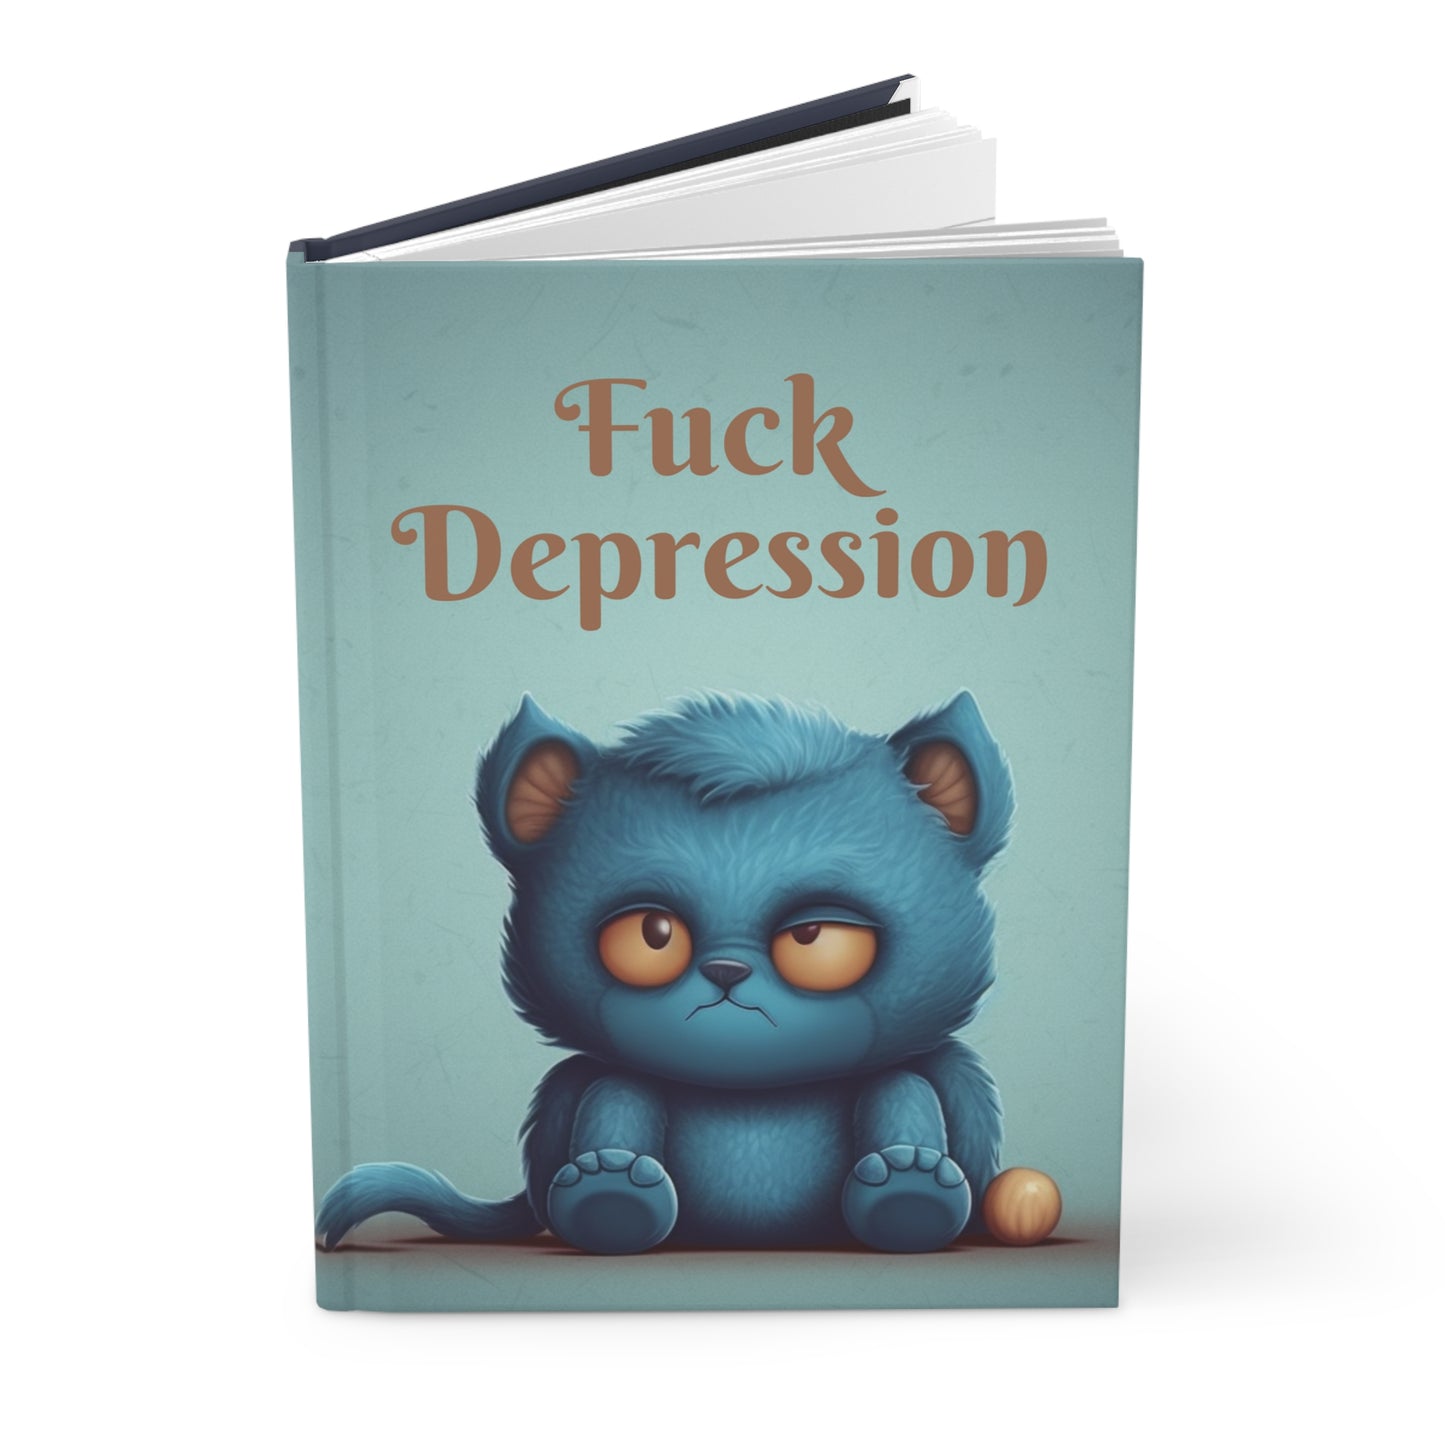 Uplifting Blue Cat Notebook Journal - Conquer Depression, Hardcover Journal for Mindfulness & Wellness, Inspiring Daily Self-Care Diary